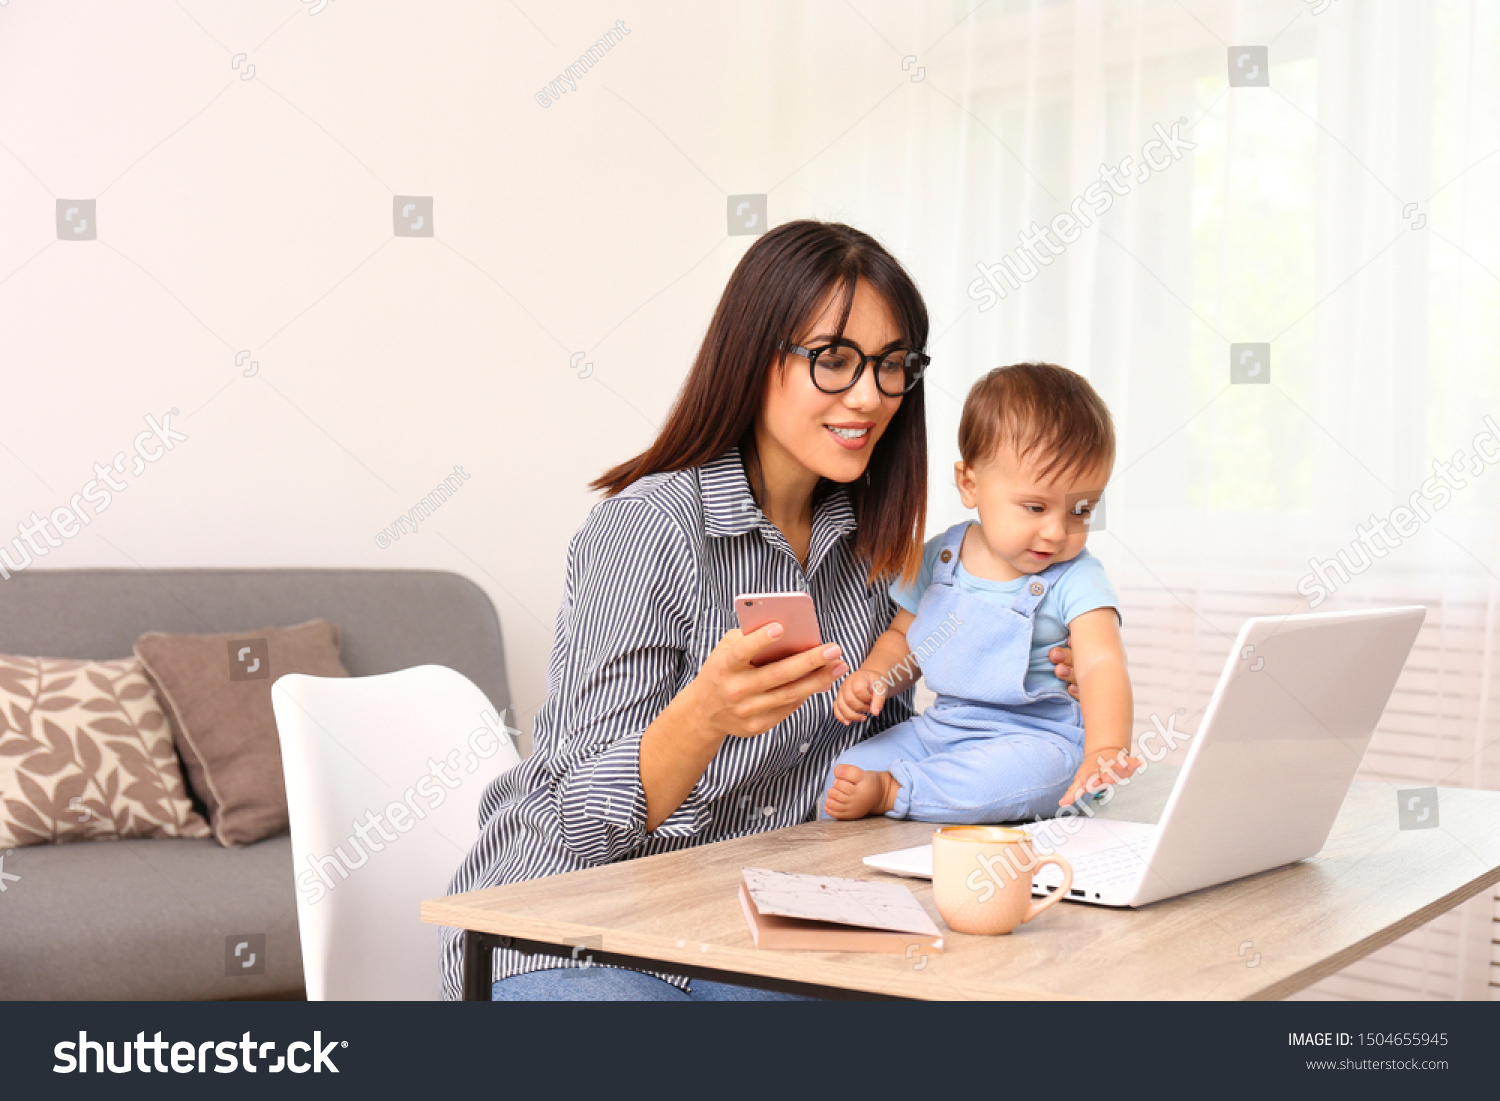 Stay at home mom working remotely on laptop while taking care of her baby. Young mother on maternity leave trying to freelance by the desk with toddler child. Close up, copy space, background. #1504655945